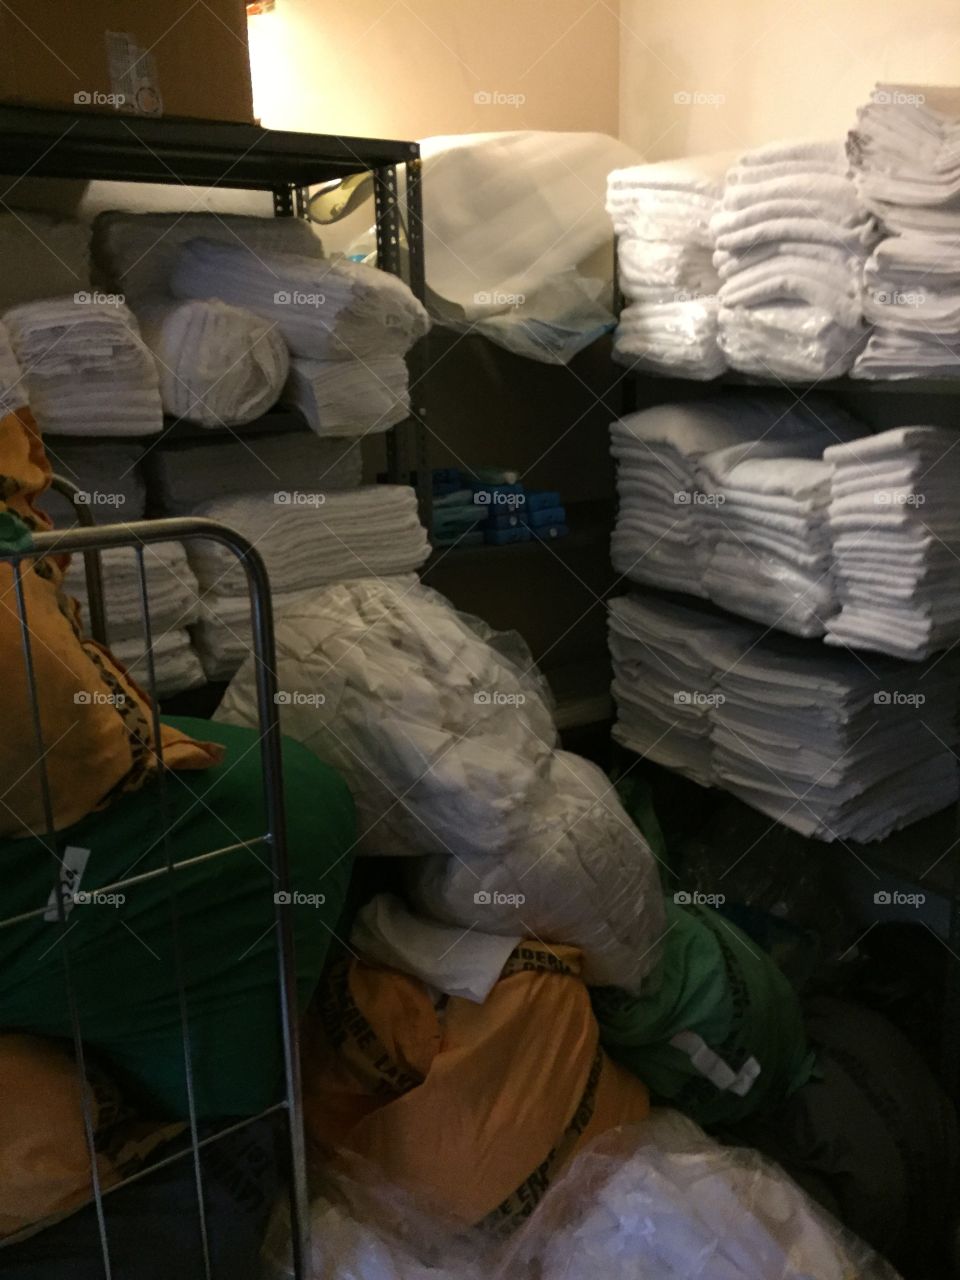 The room where clean and used laundry is stored